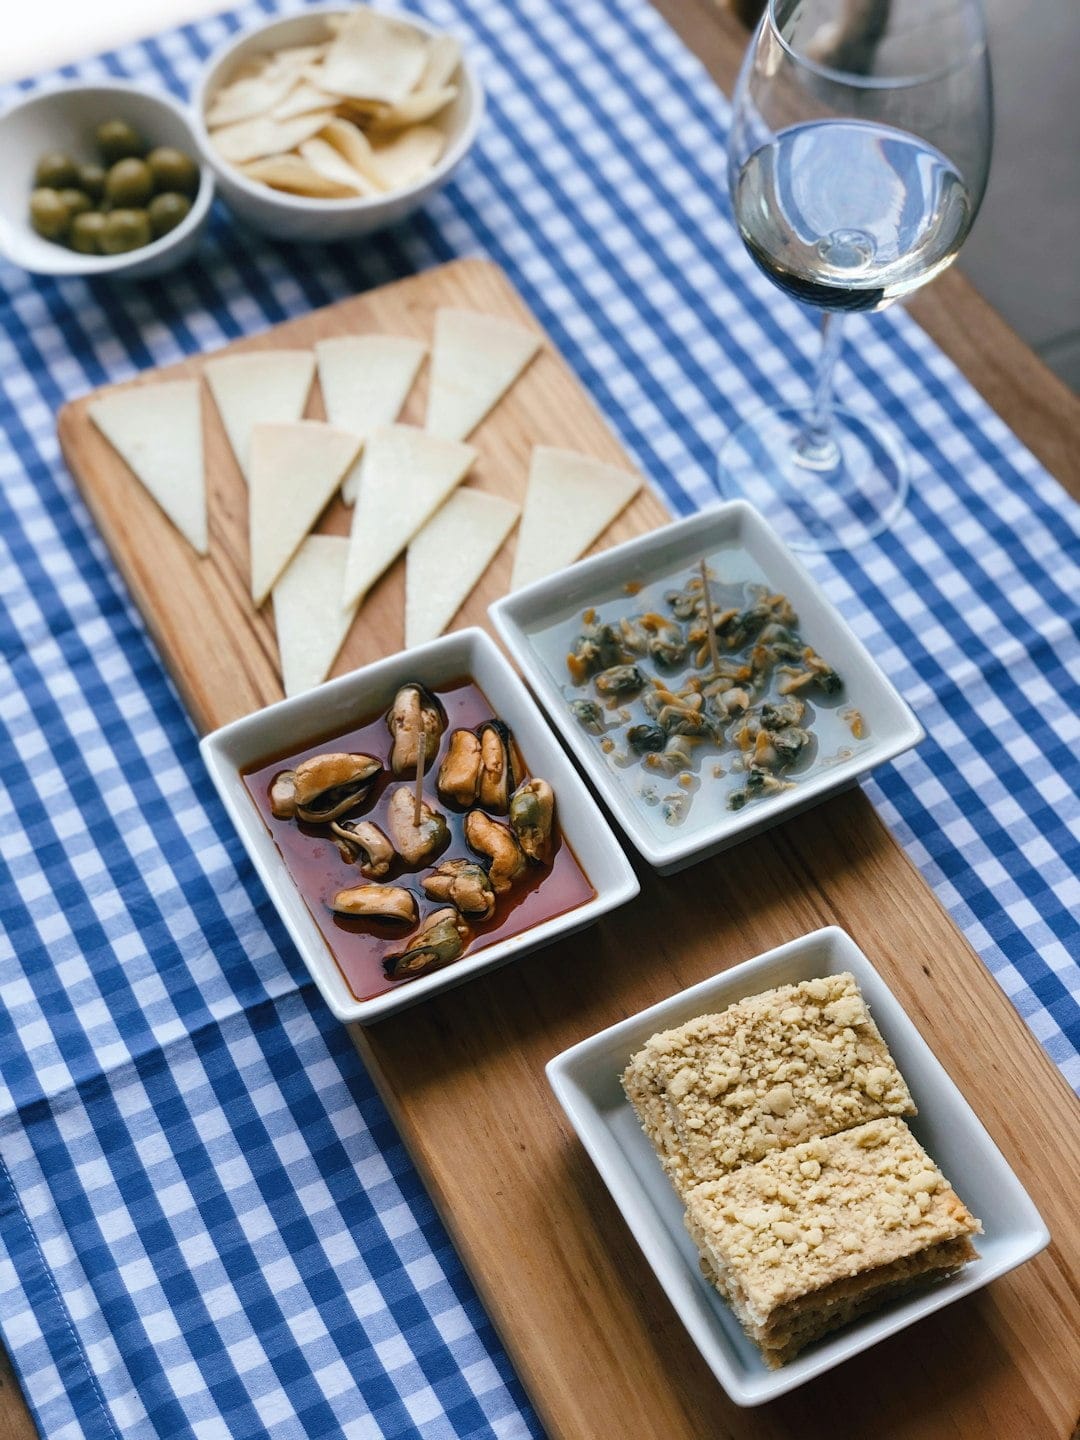 Table with blue checkered tablecloth, Spanish tapas, and a glass of wine, illustrating mealtime customs